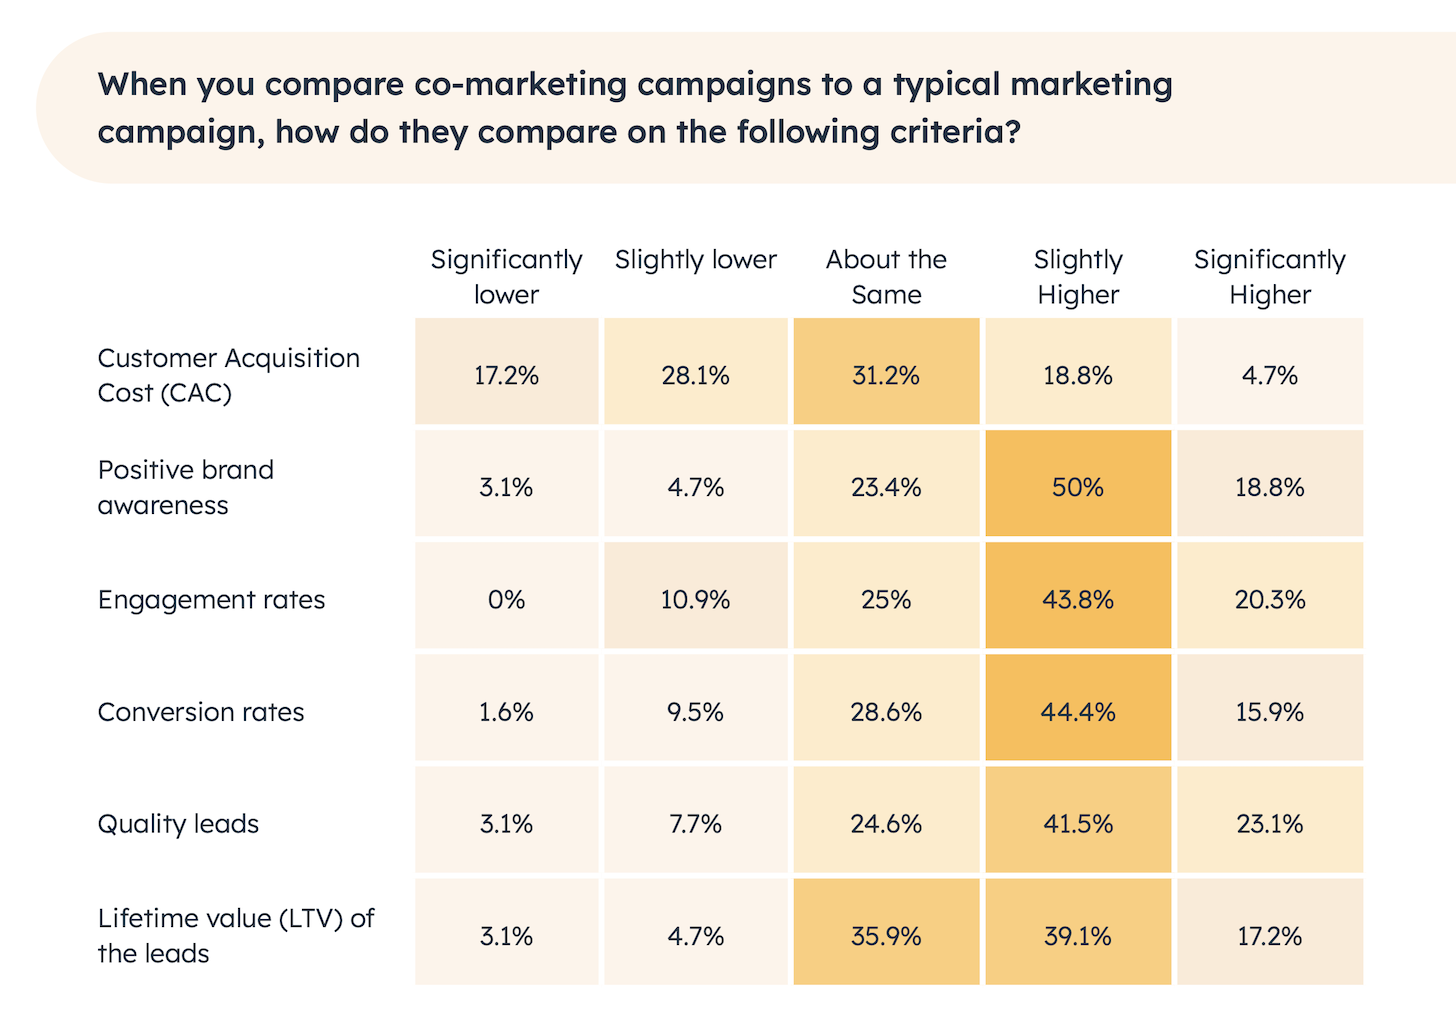 Co-Marketing Campaigns Outperform on Multiple Dimensions